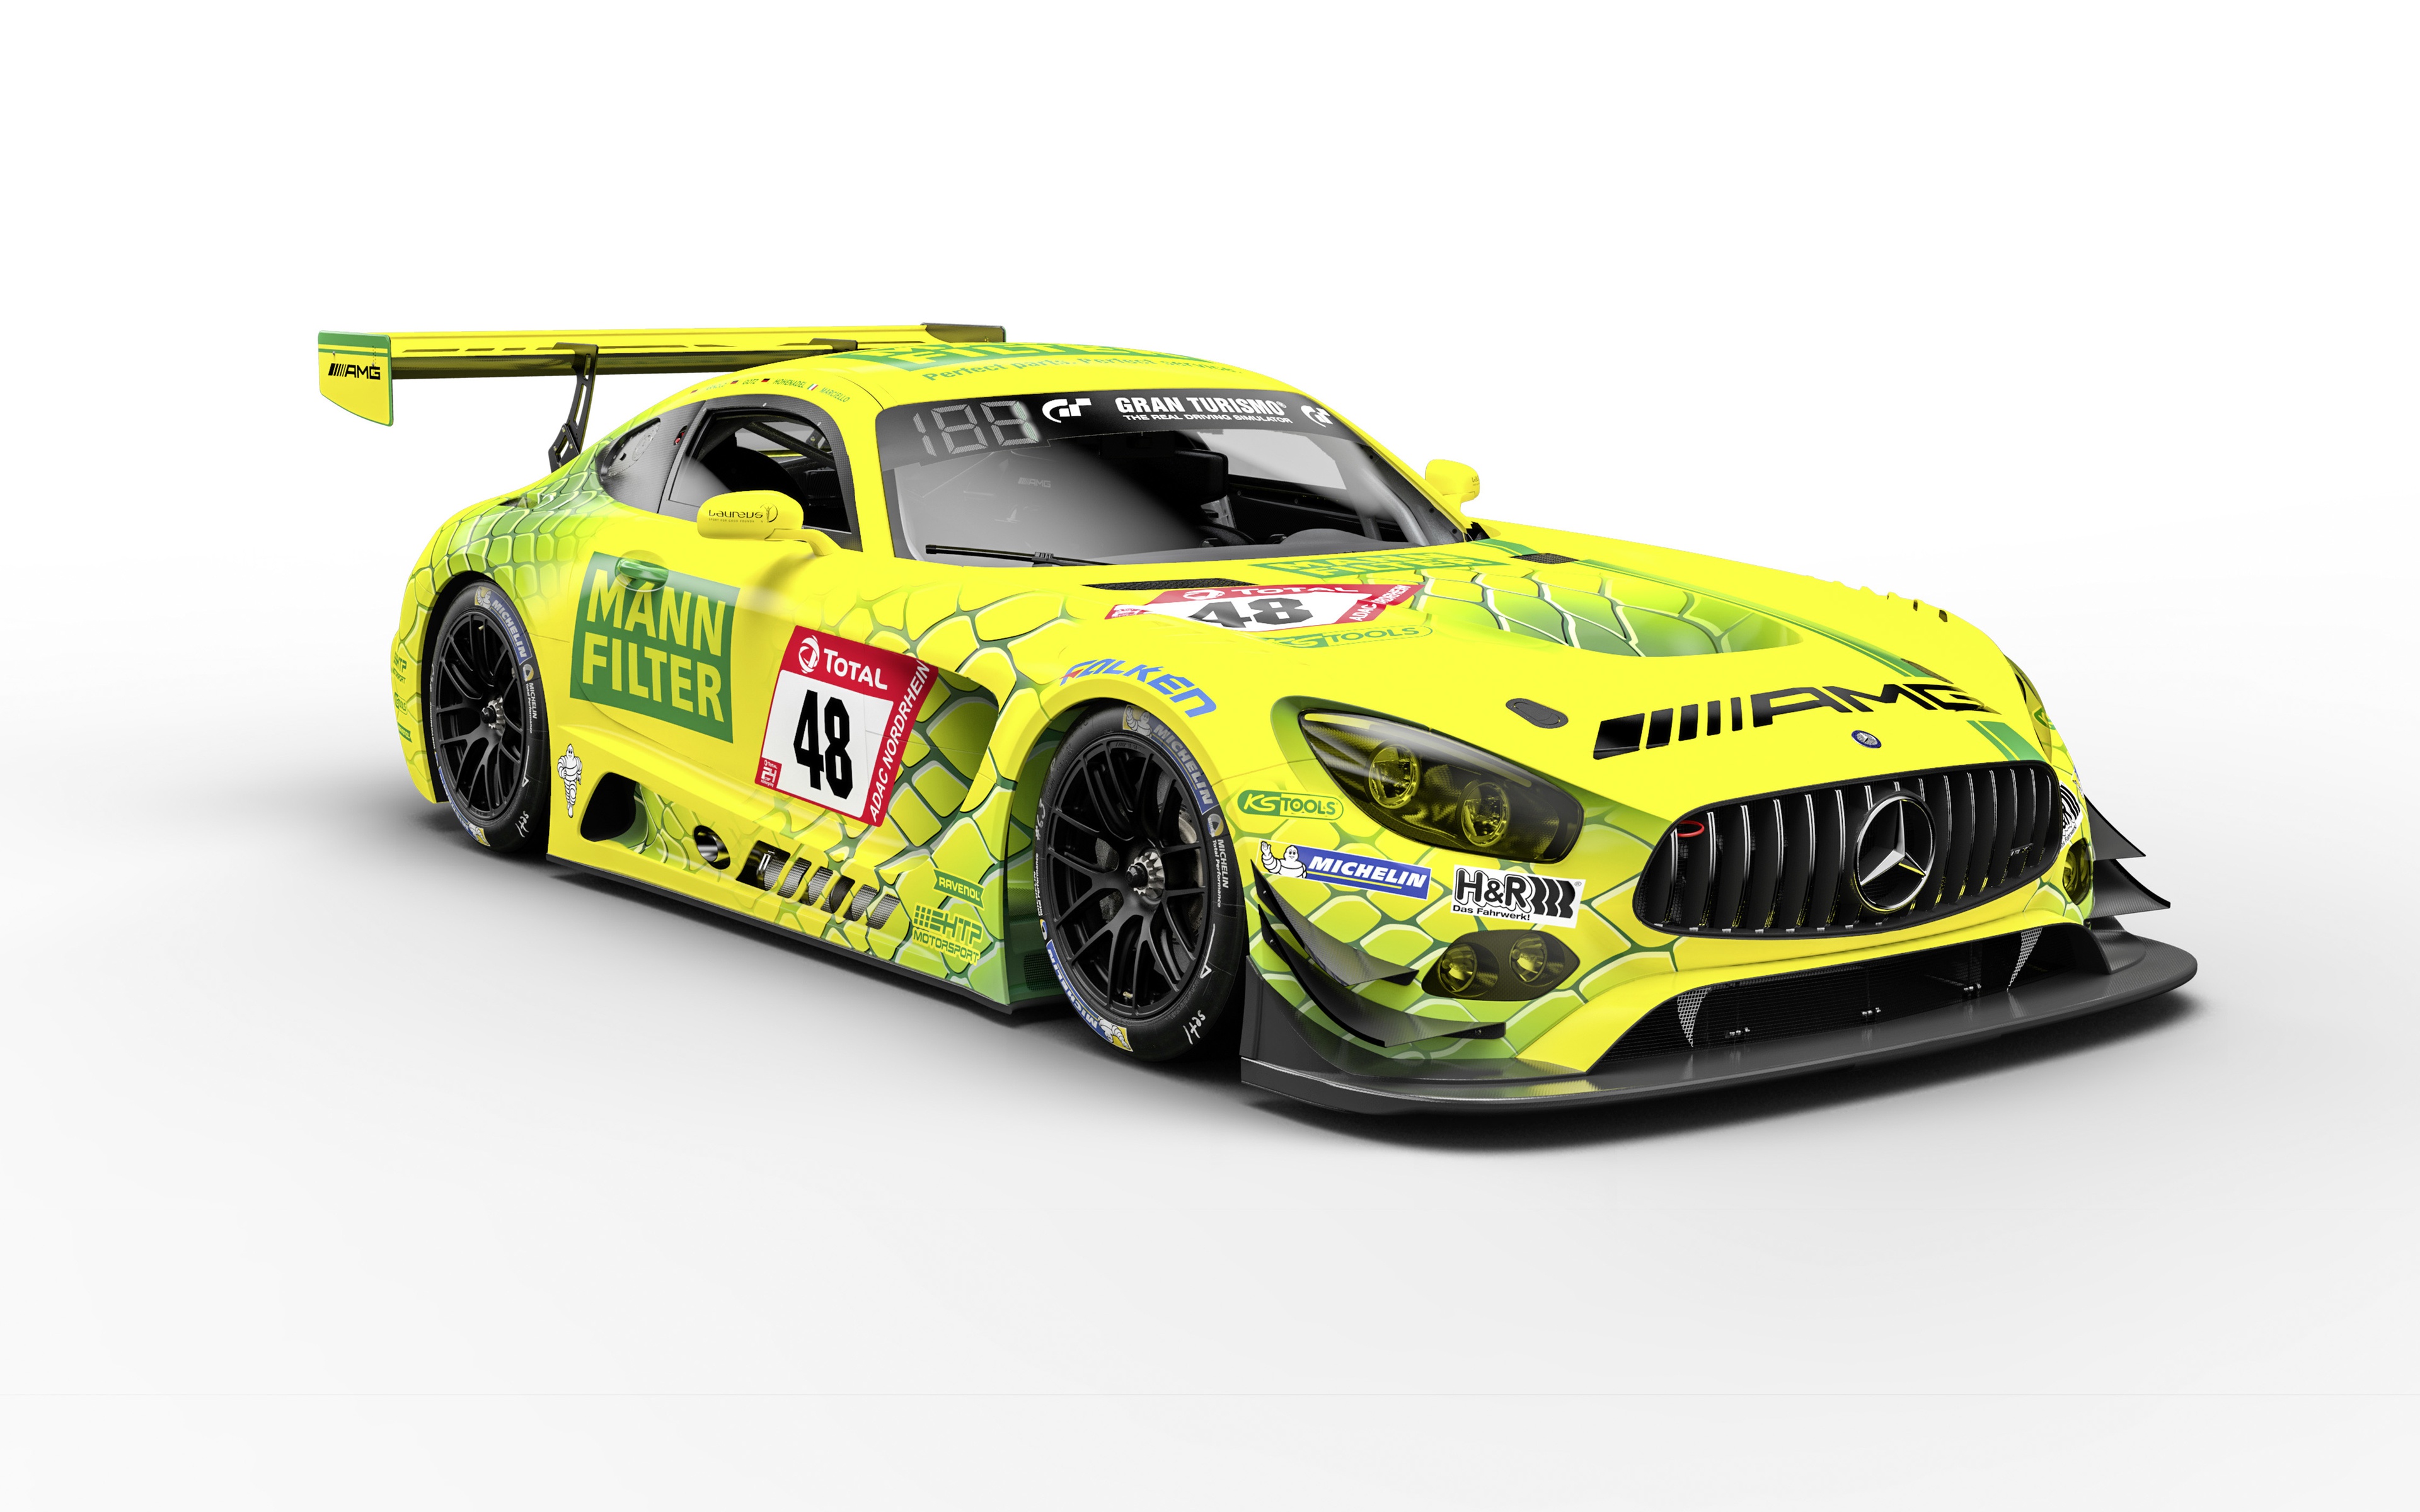 General 3840x2400 car vehicle white background Mercedes-Benz German cars race cars livery Grand Tour simple background